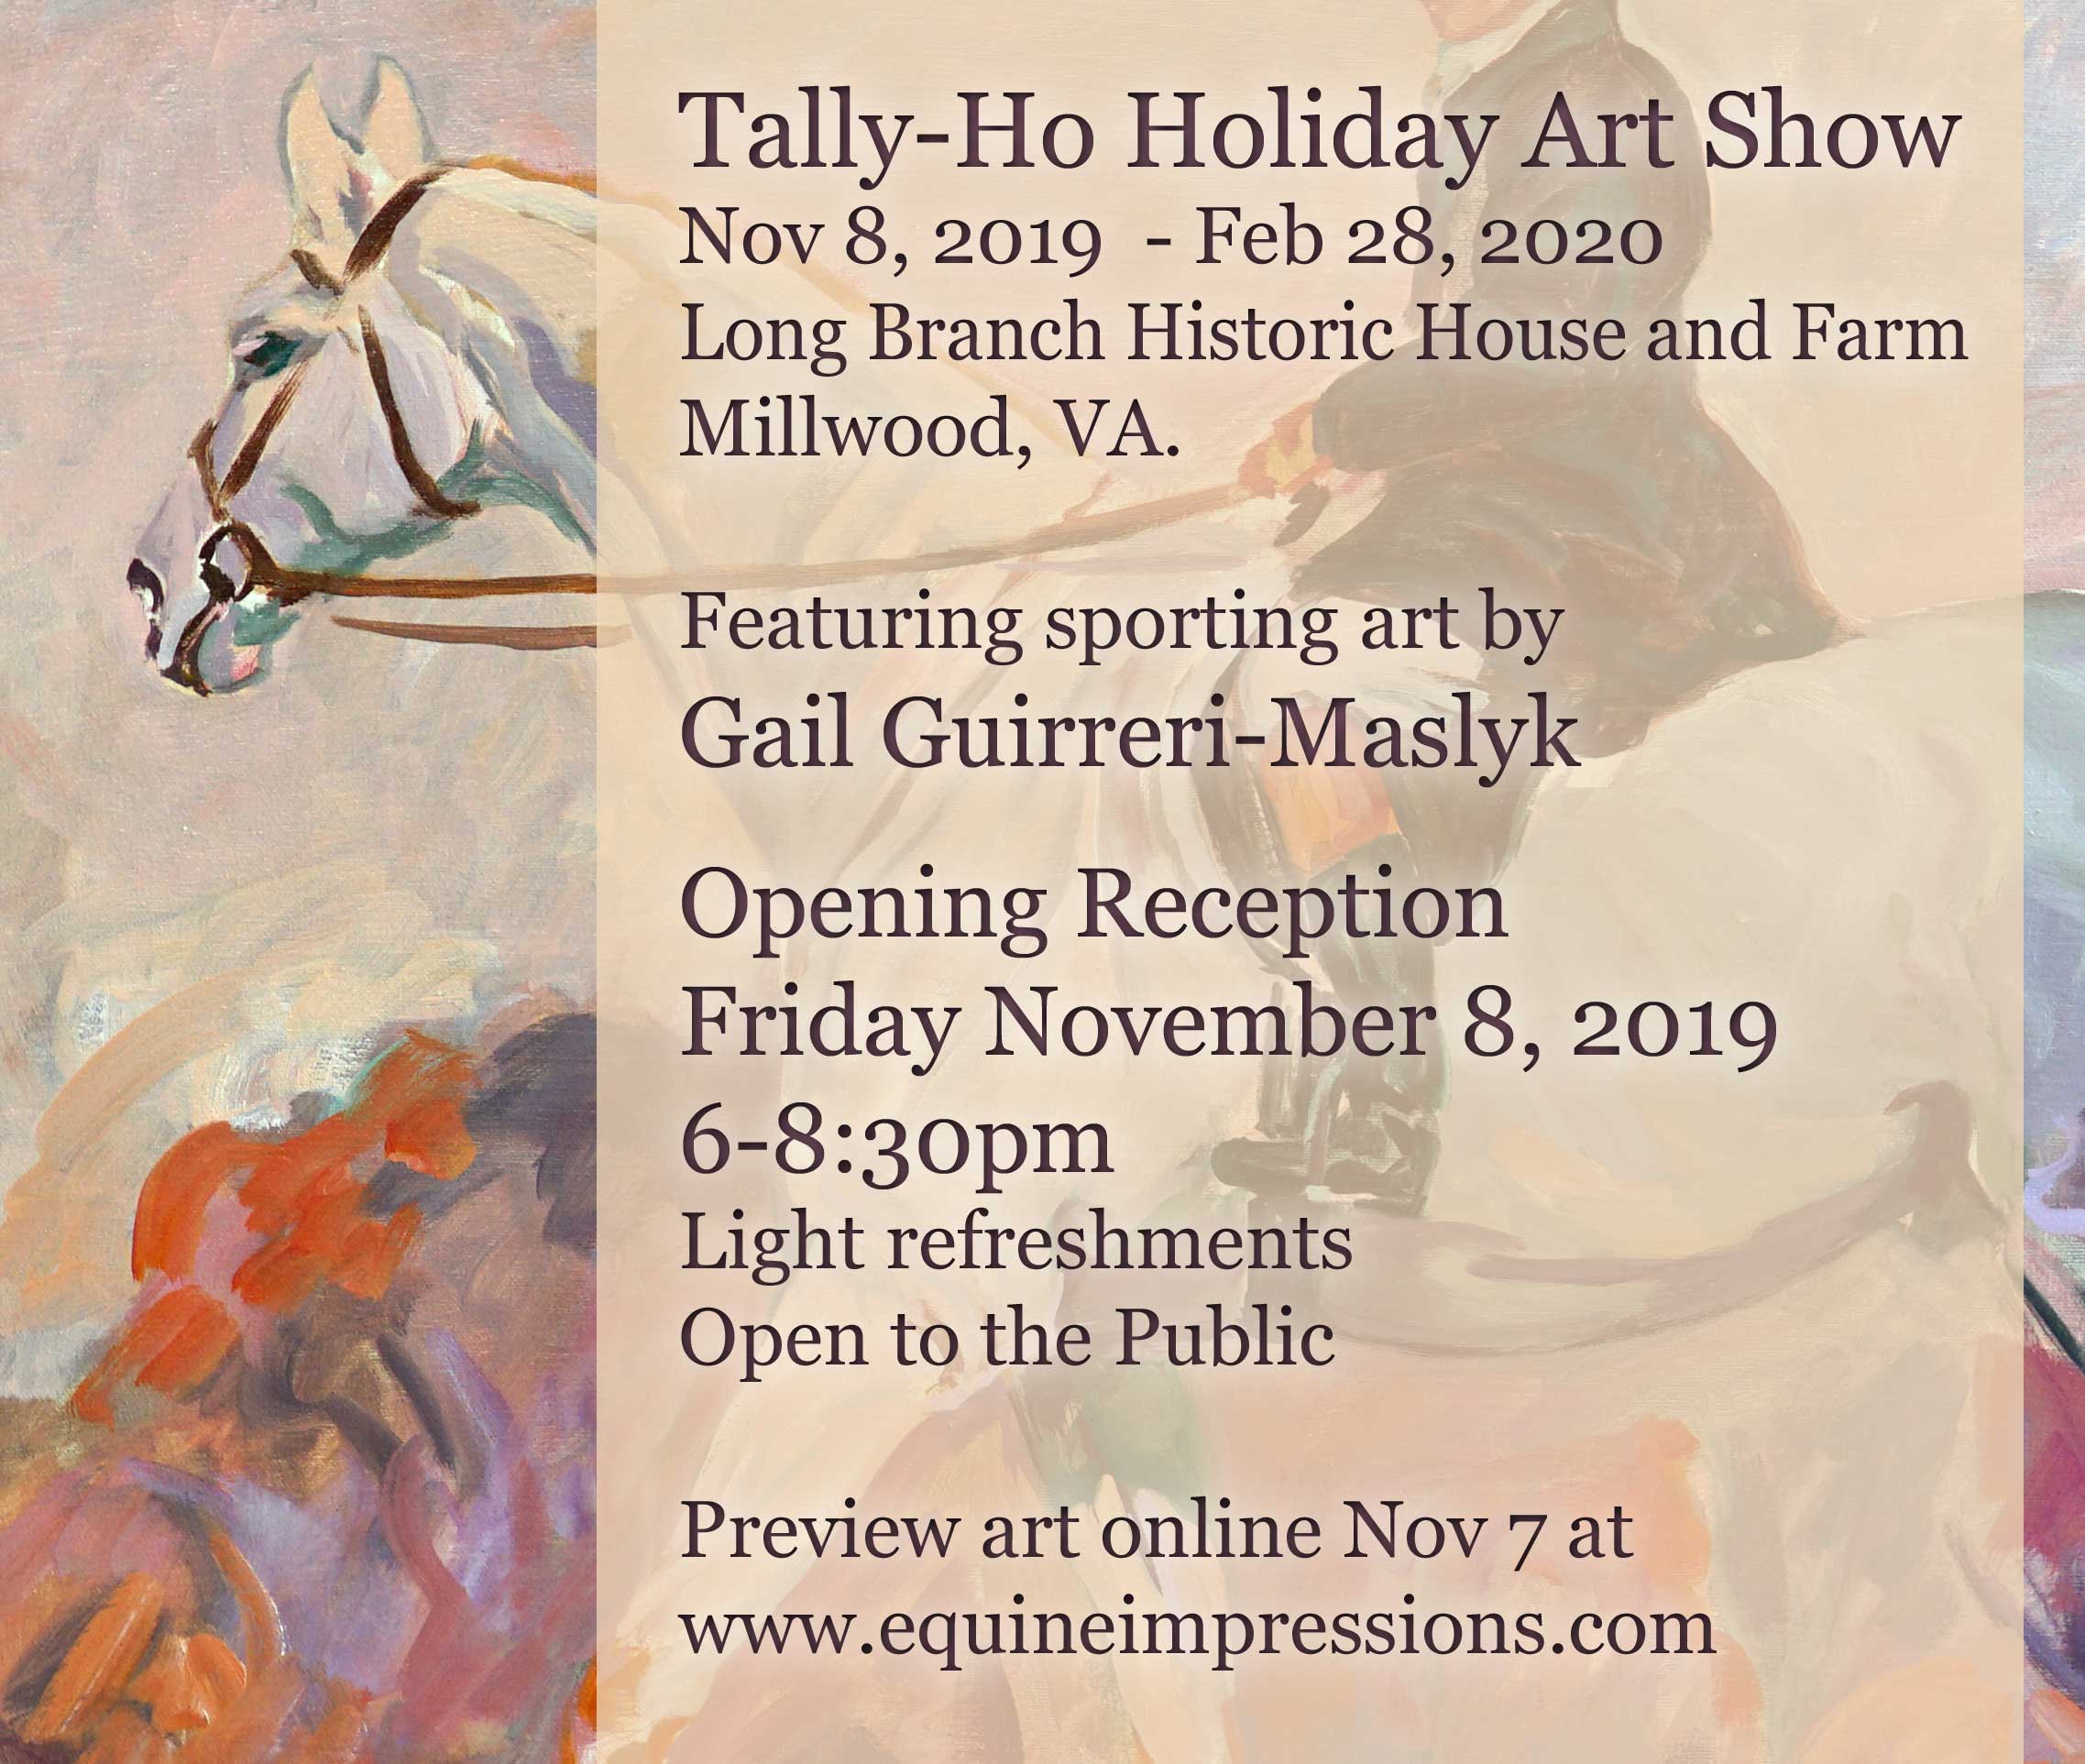 Tally-Ho Holiday Art Show featuring sporting art by Gail Guirreri-Maslyk